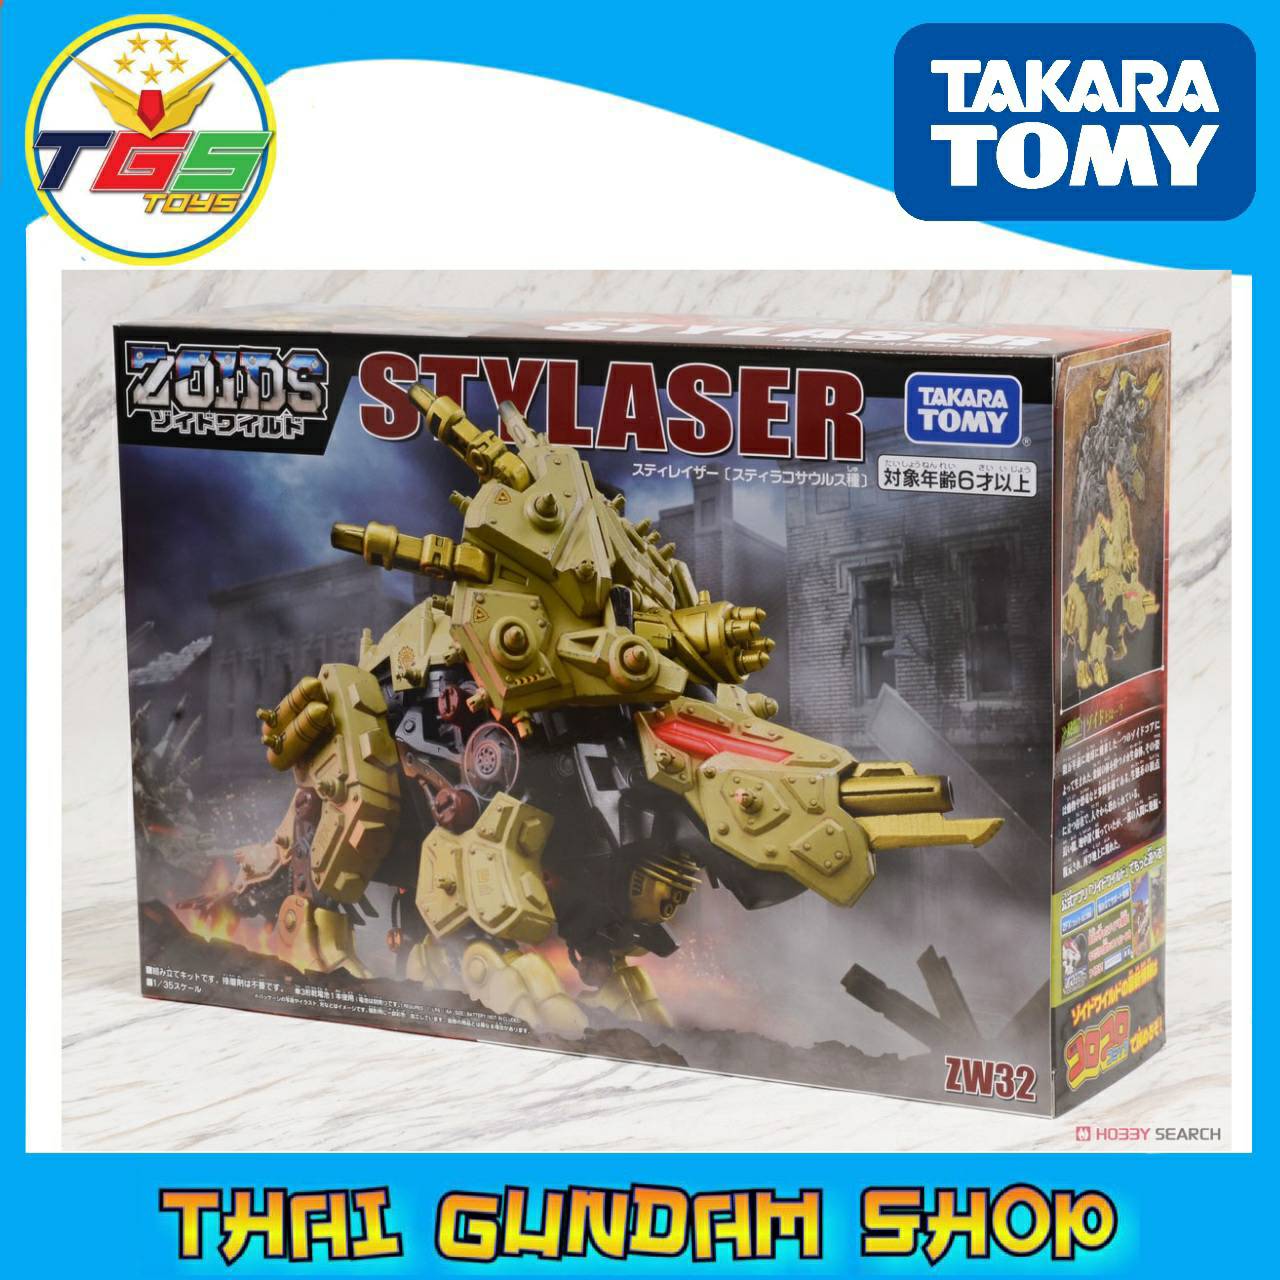 ⭐TGS⭐Zoids Wild ZW32 Stylaser (Character Toy)